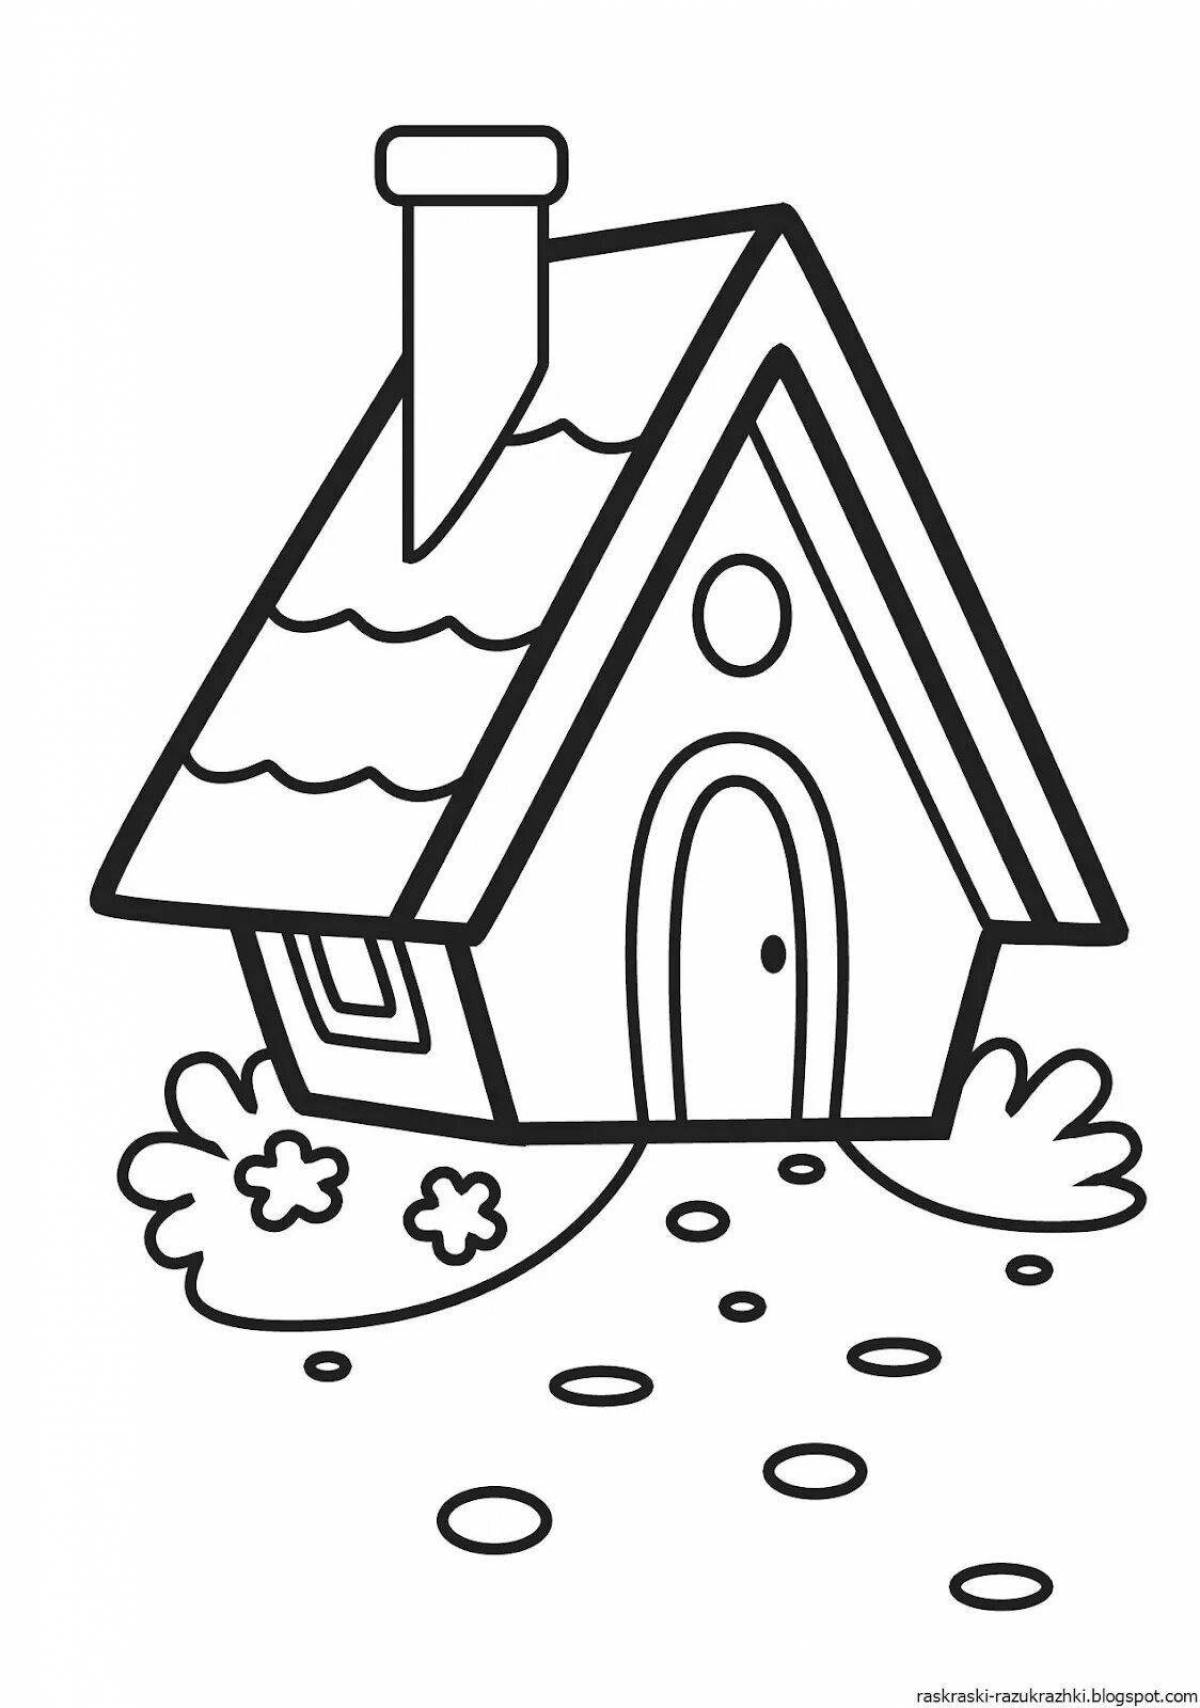 Exquisite house coloring book for kids